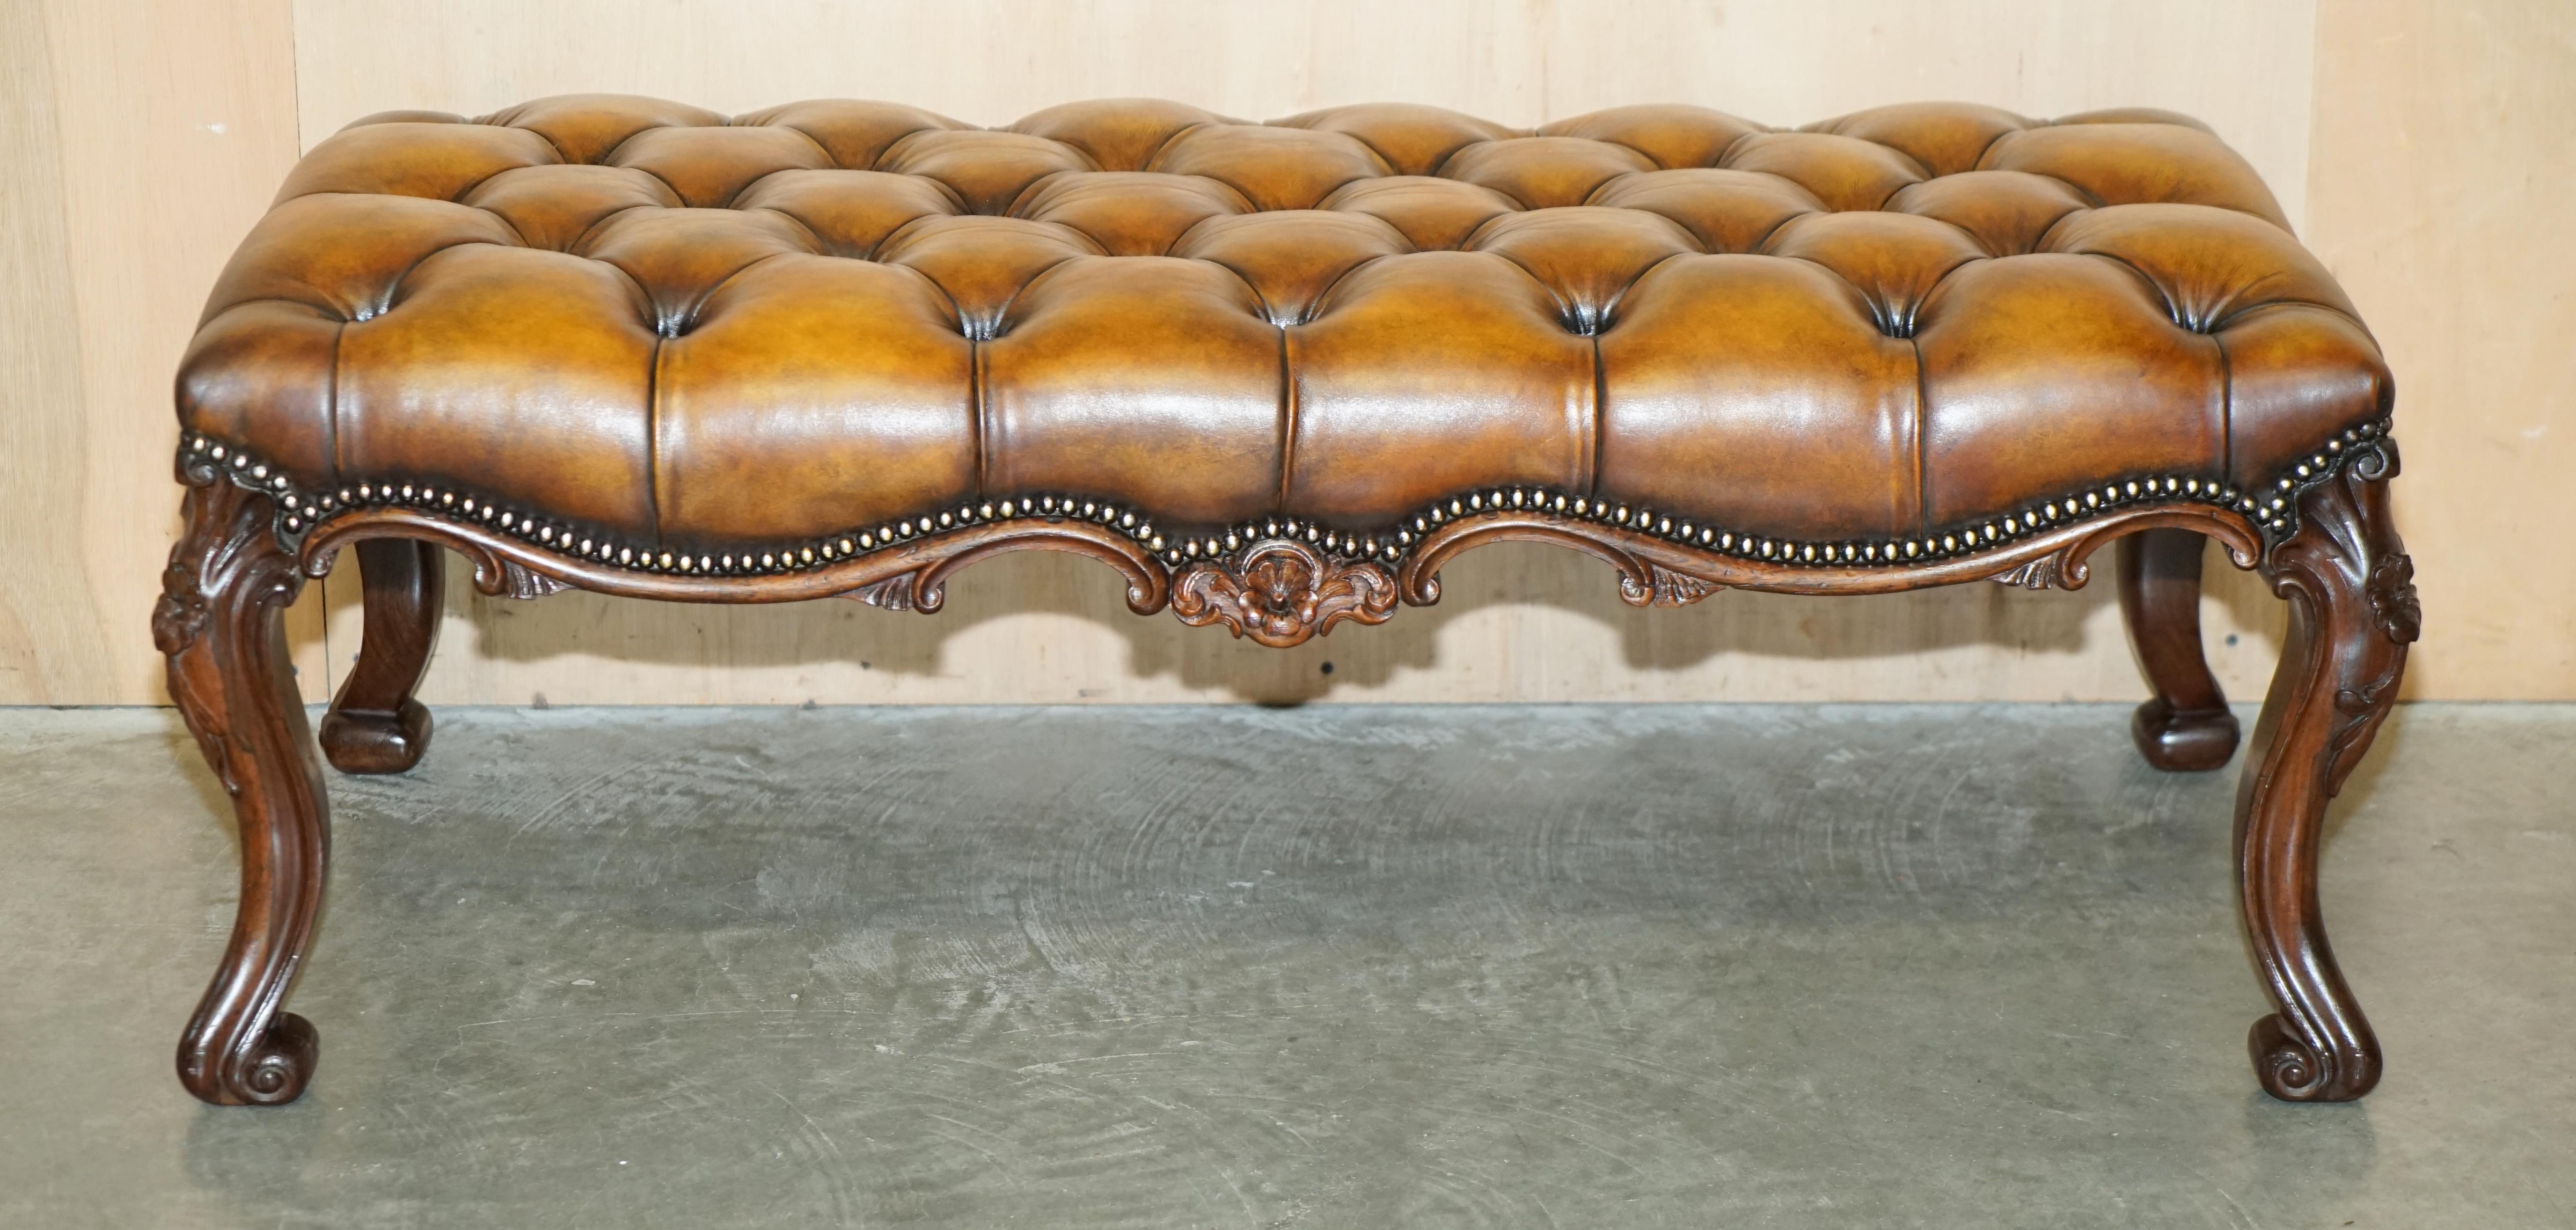 Victorian FINE ANTIQUE ViCTORIAN HARDWOOD SHOW FRAME CHESTERFIELD BROWN LEATHER FOOTSTOOL